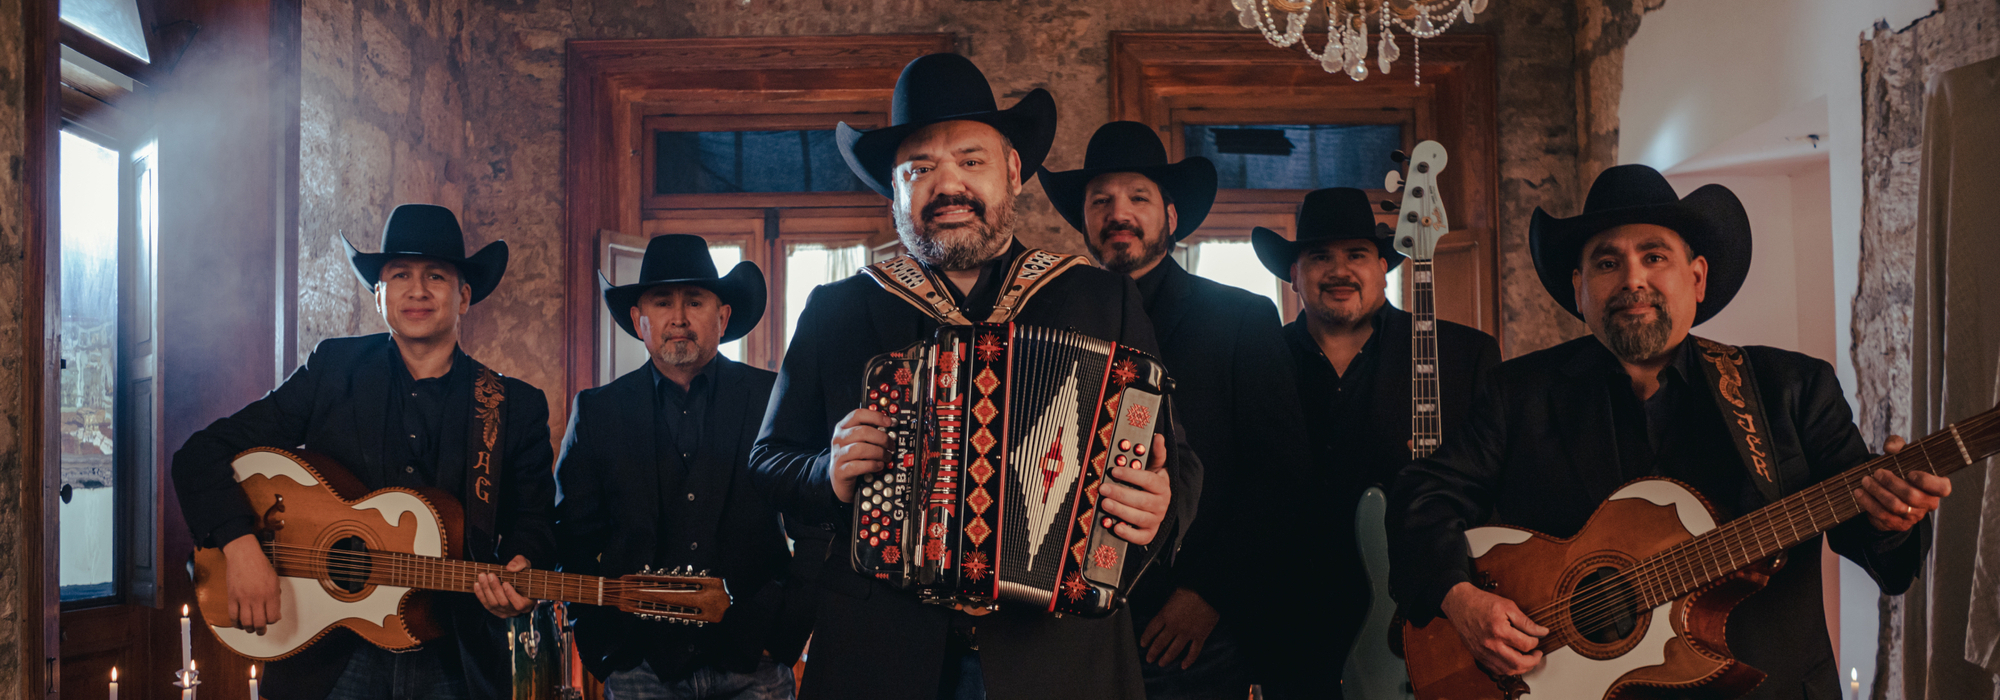 A Intocable live event